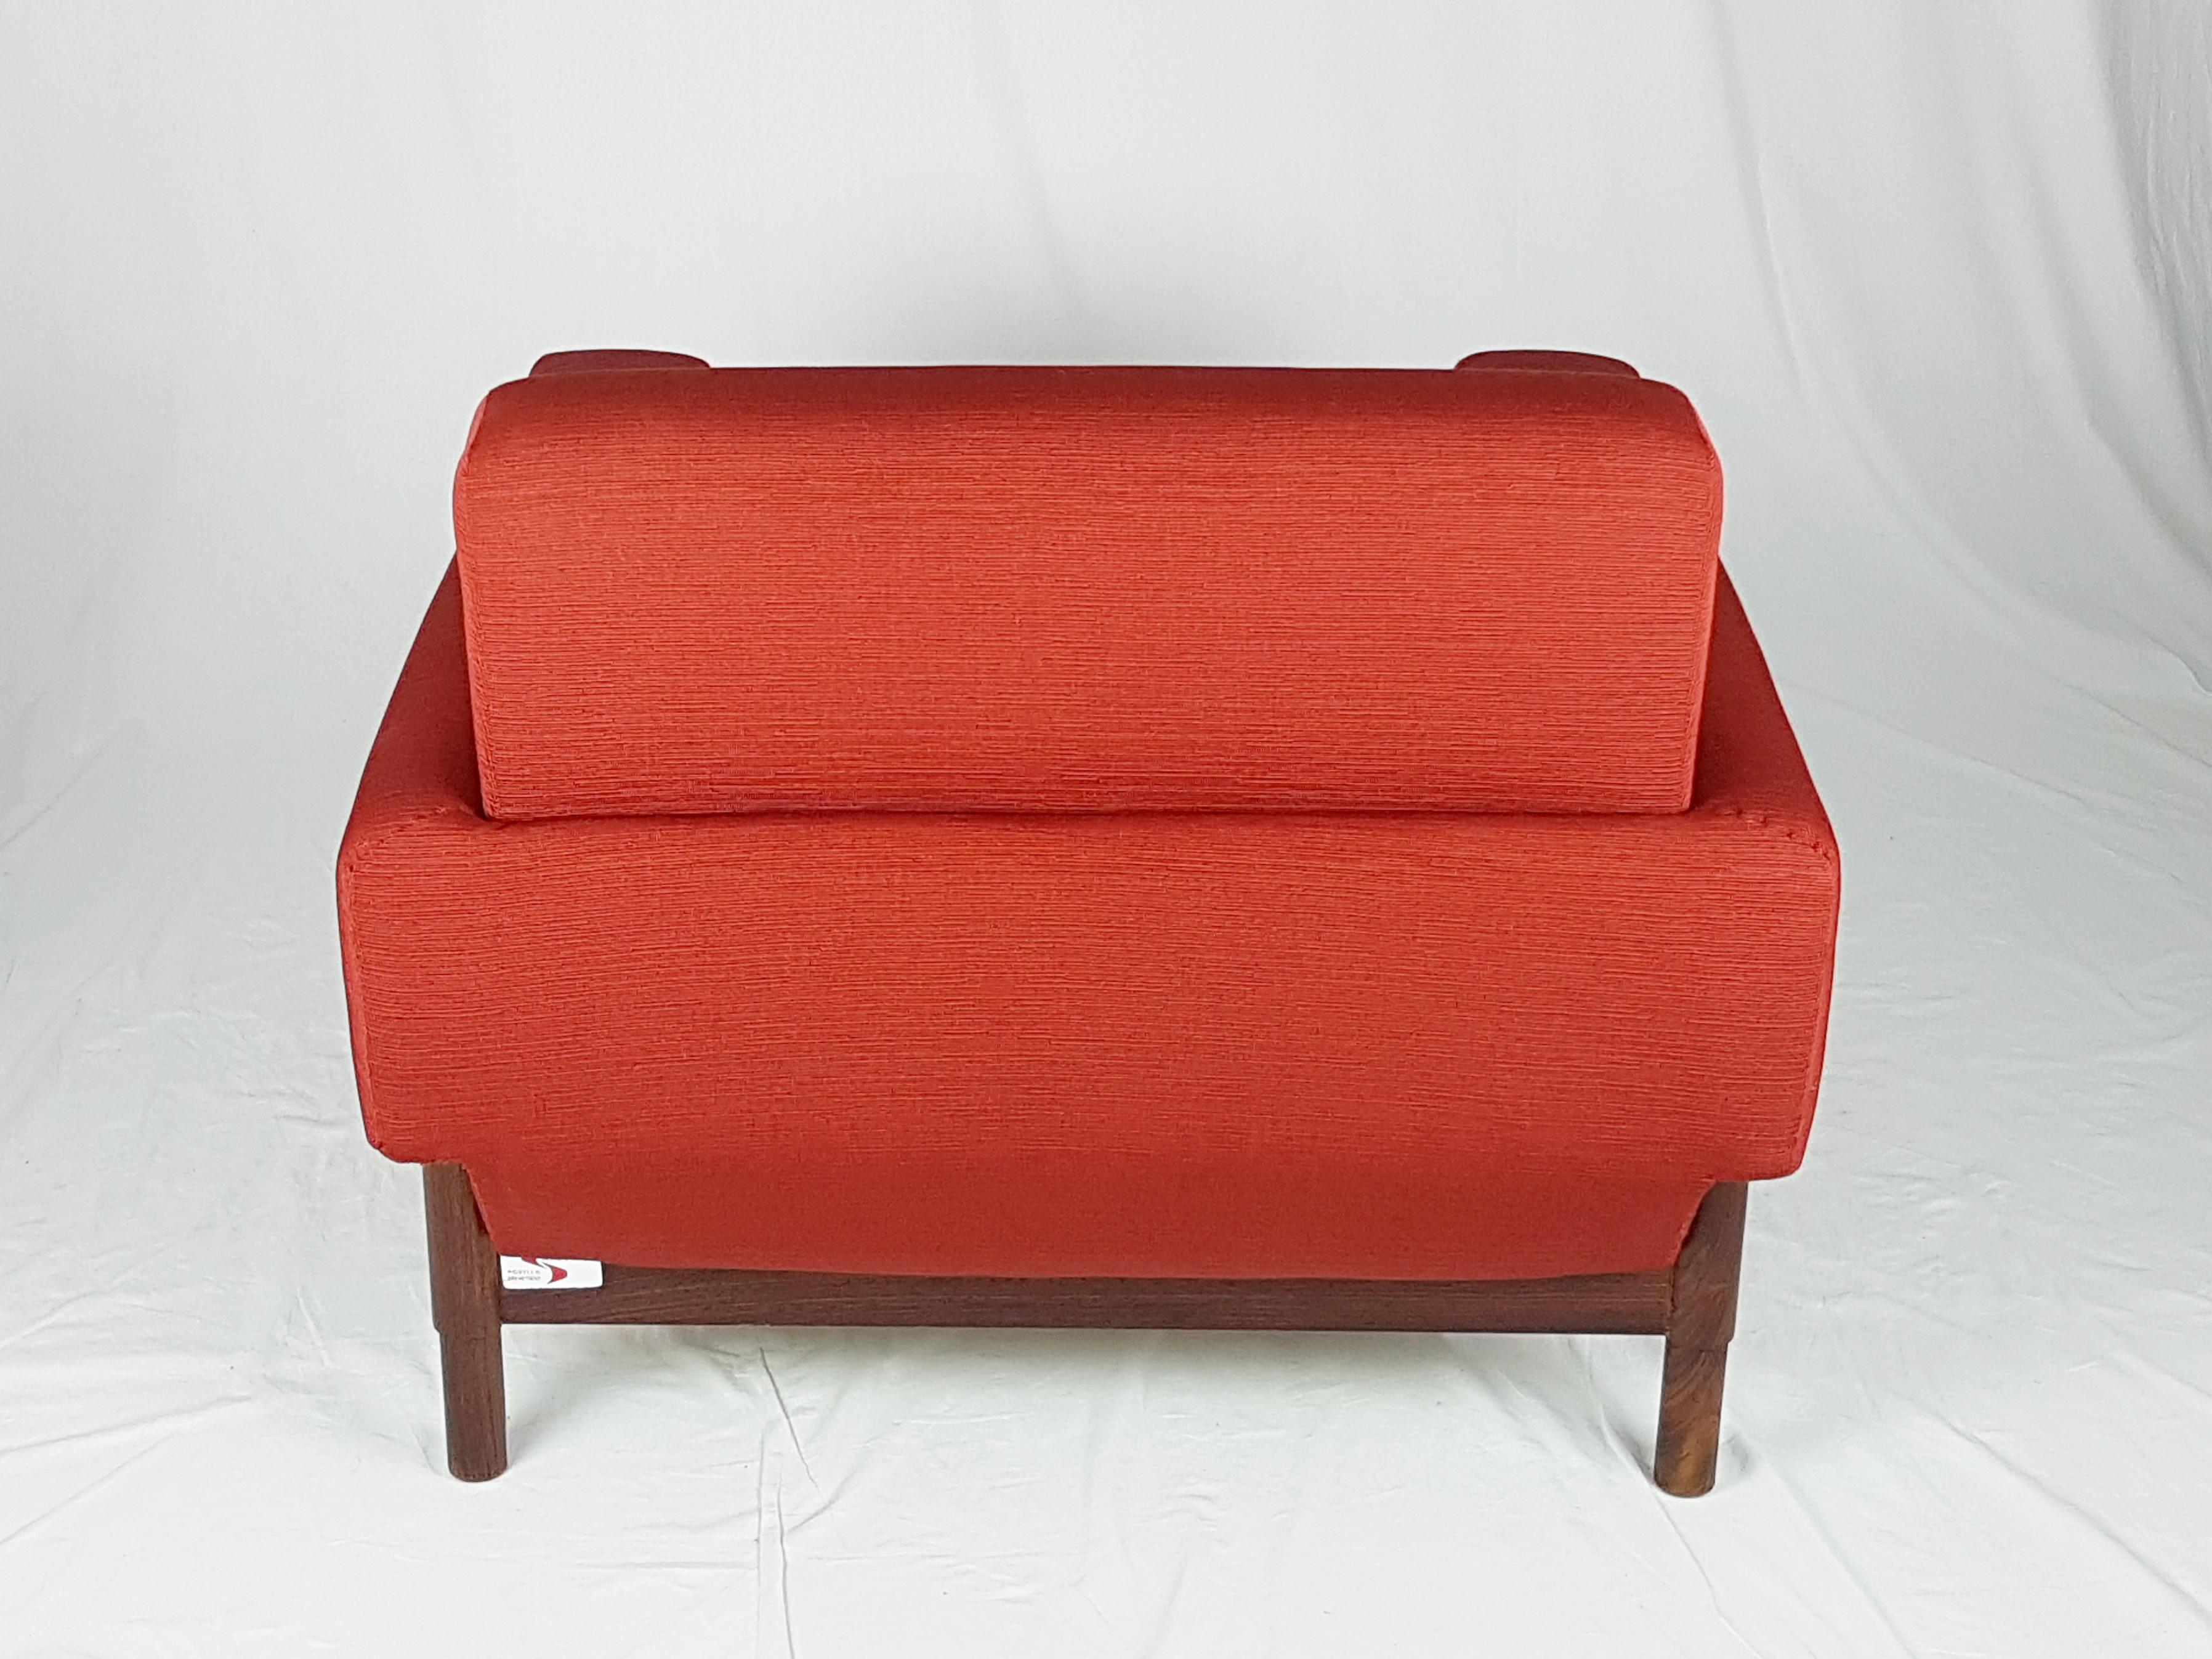 Pair of Wood & Brick Red Fabric 1960 Armchair by S. Saporiti for F.Lli Saporiti For Sale 6